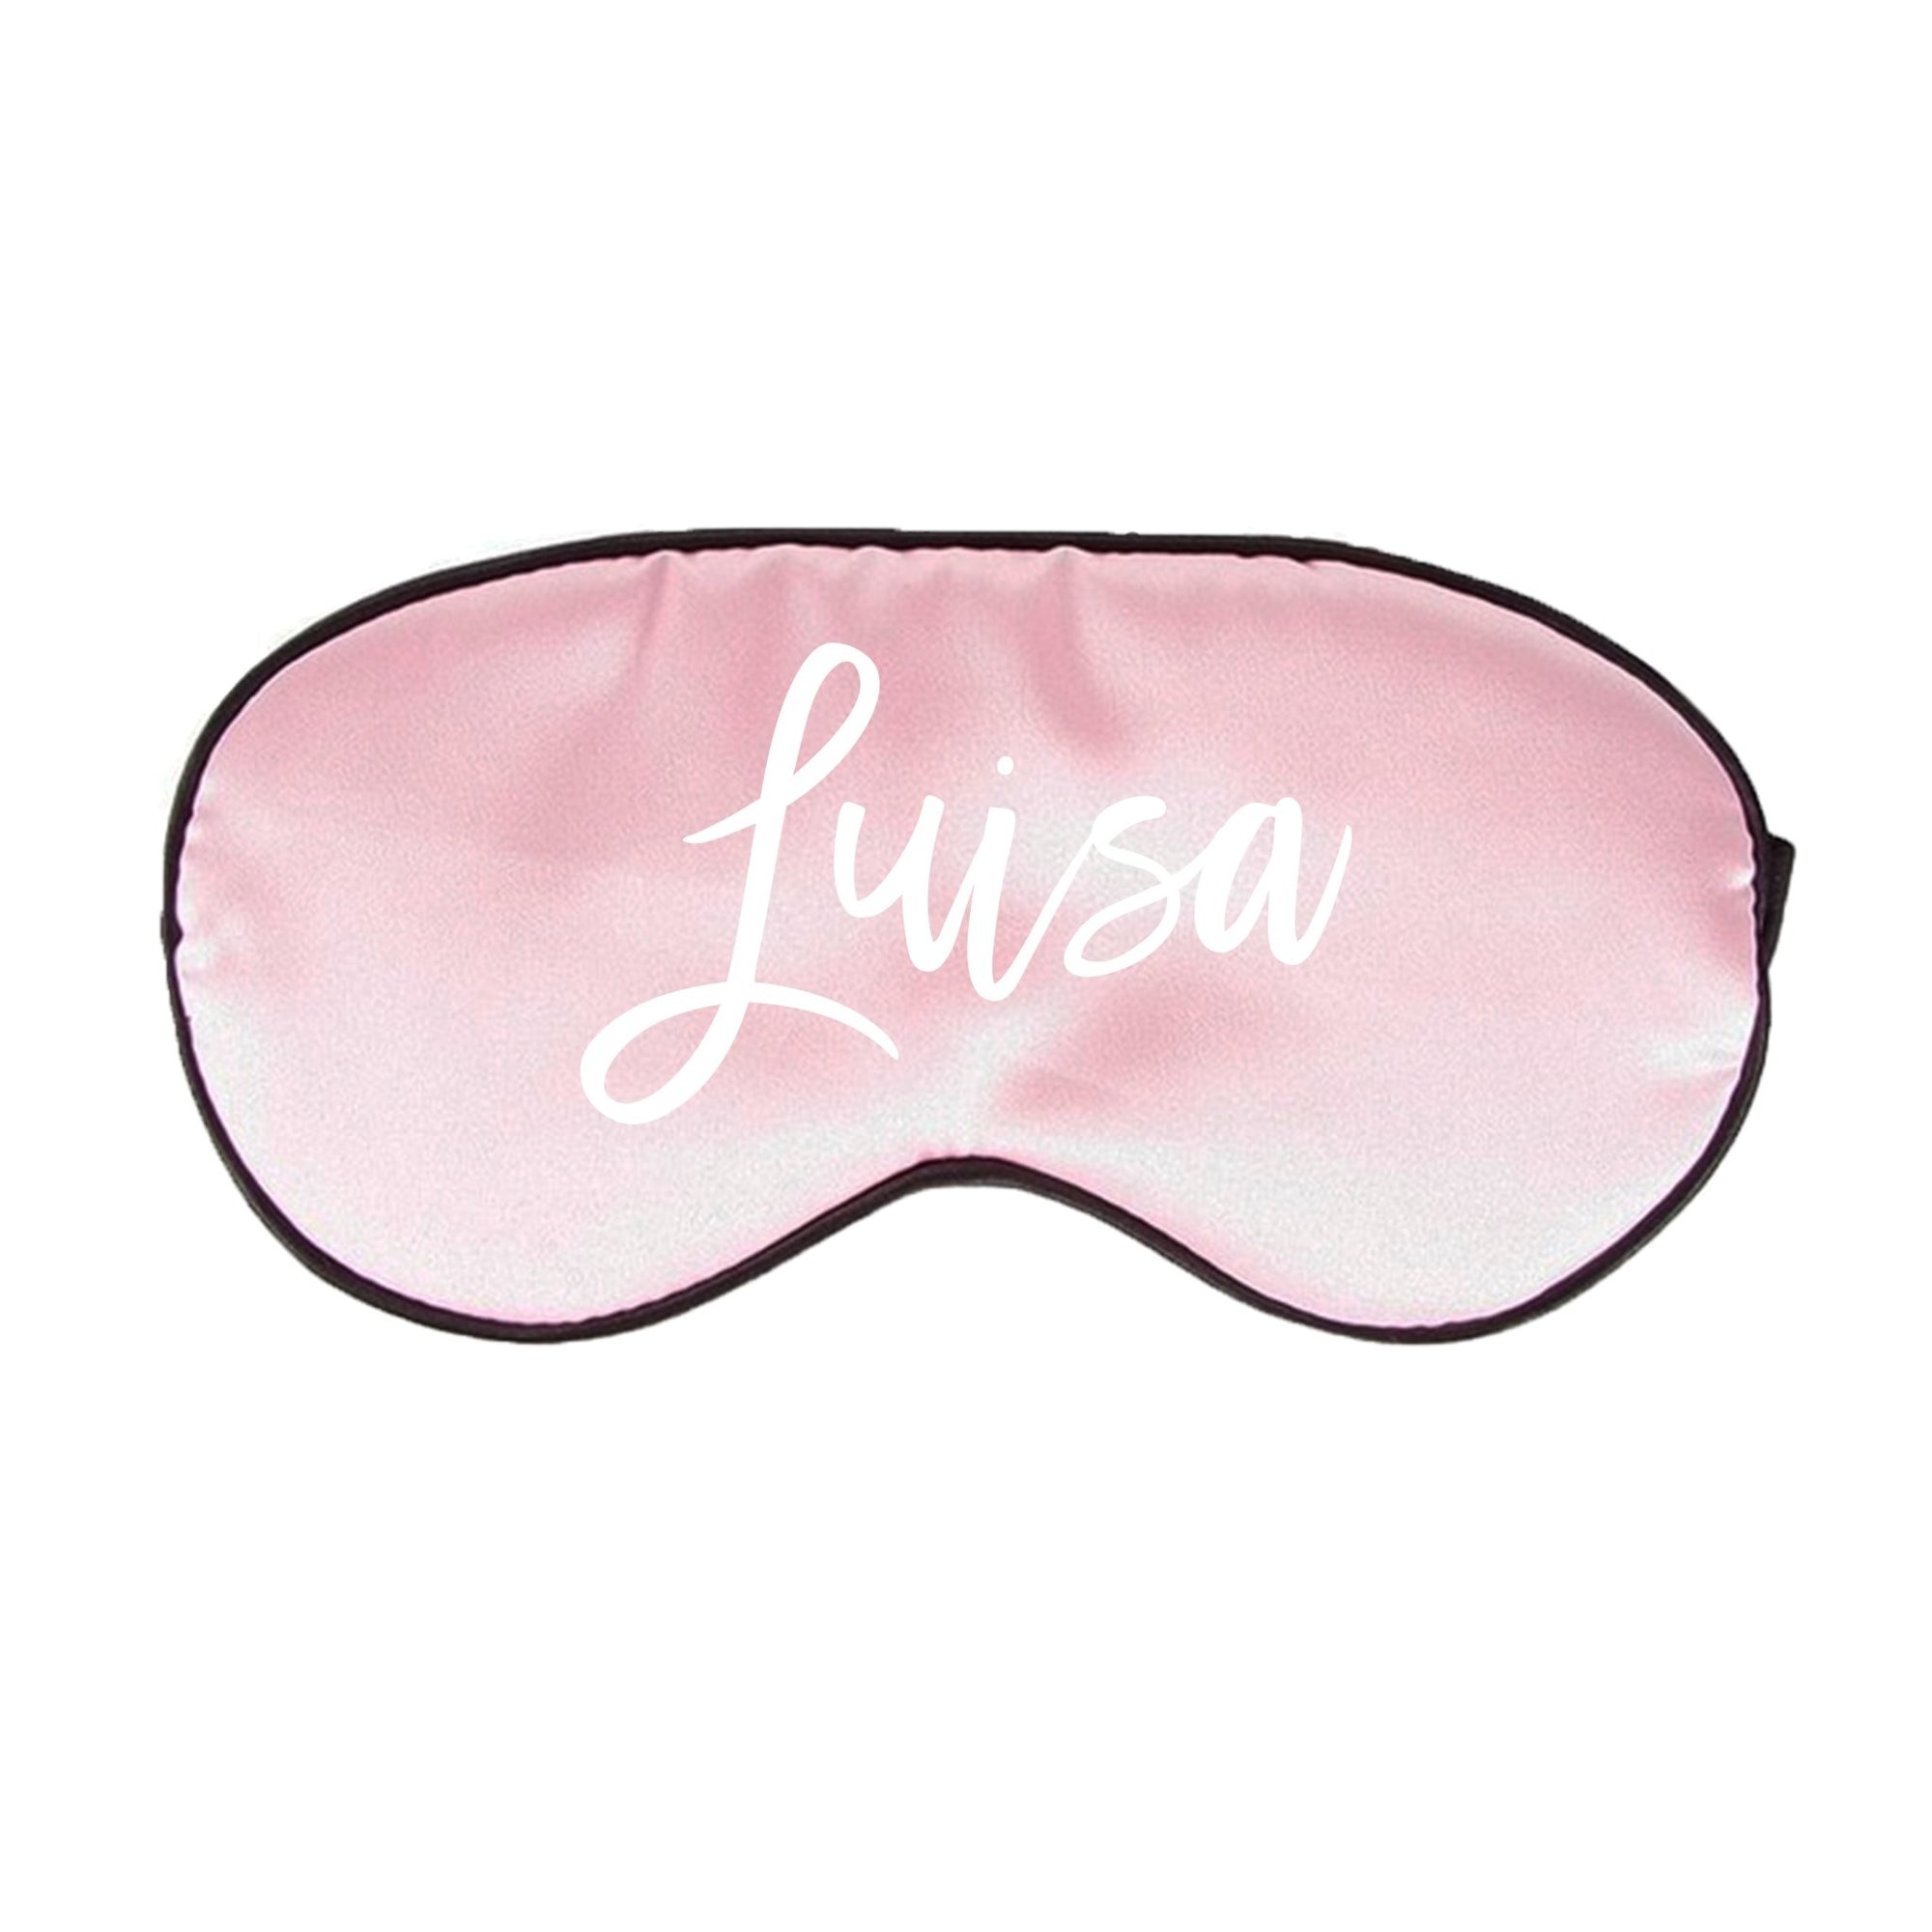 A pink sleep mask is customized with a white script name.